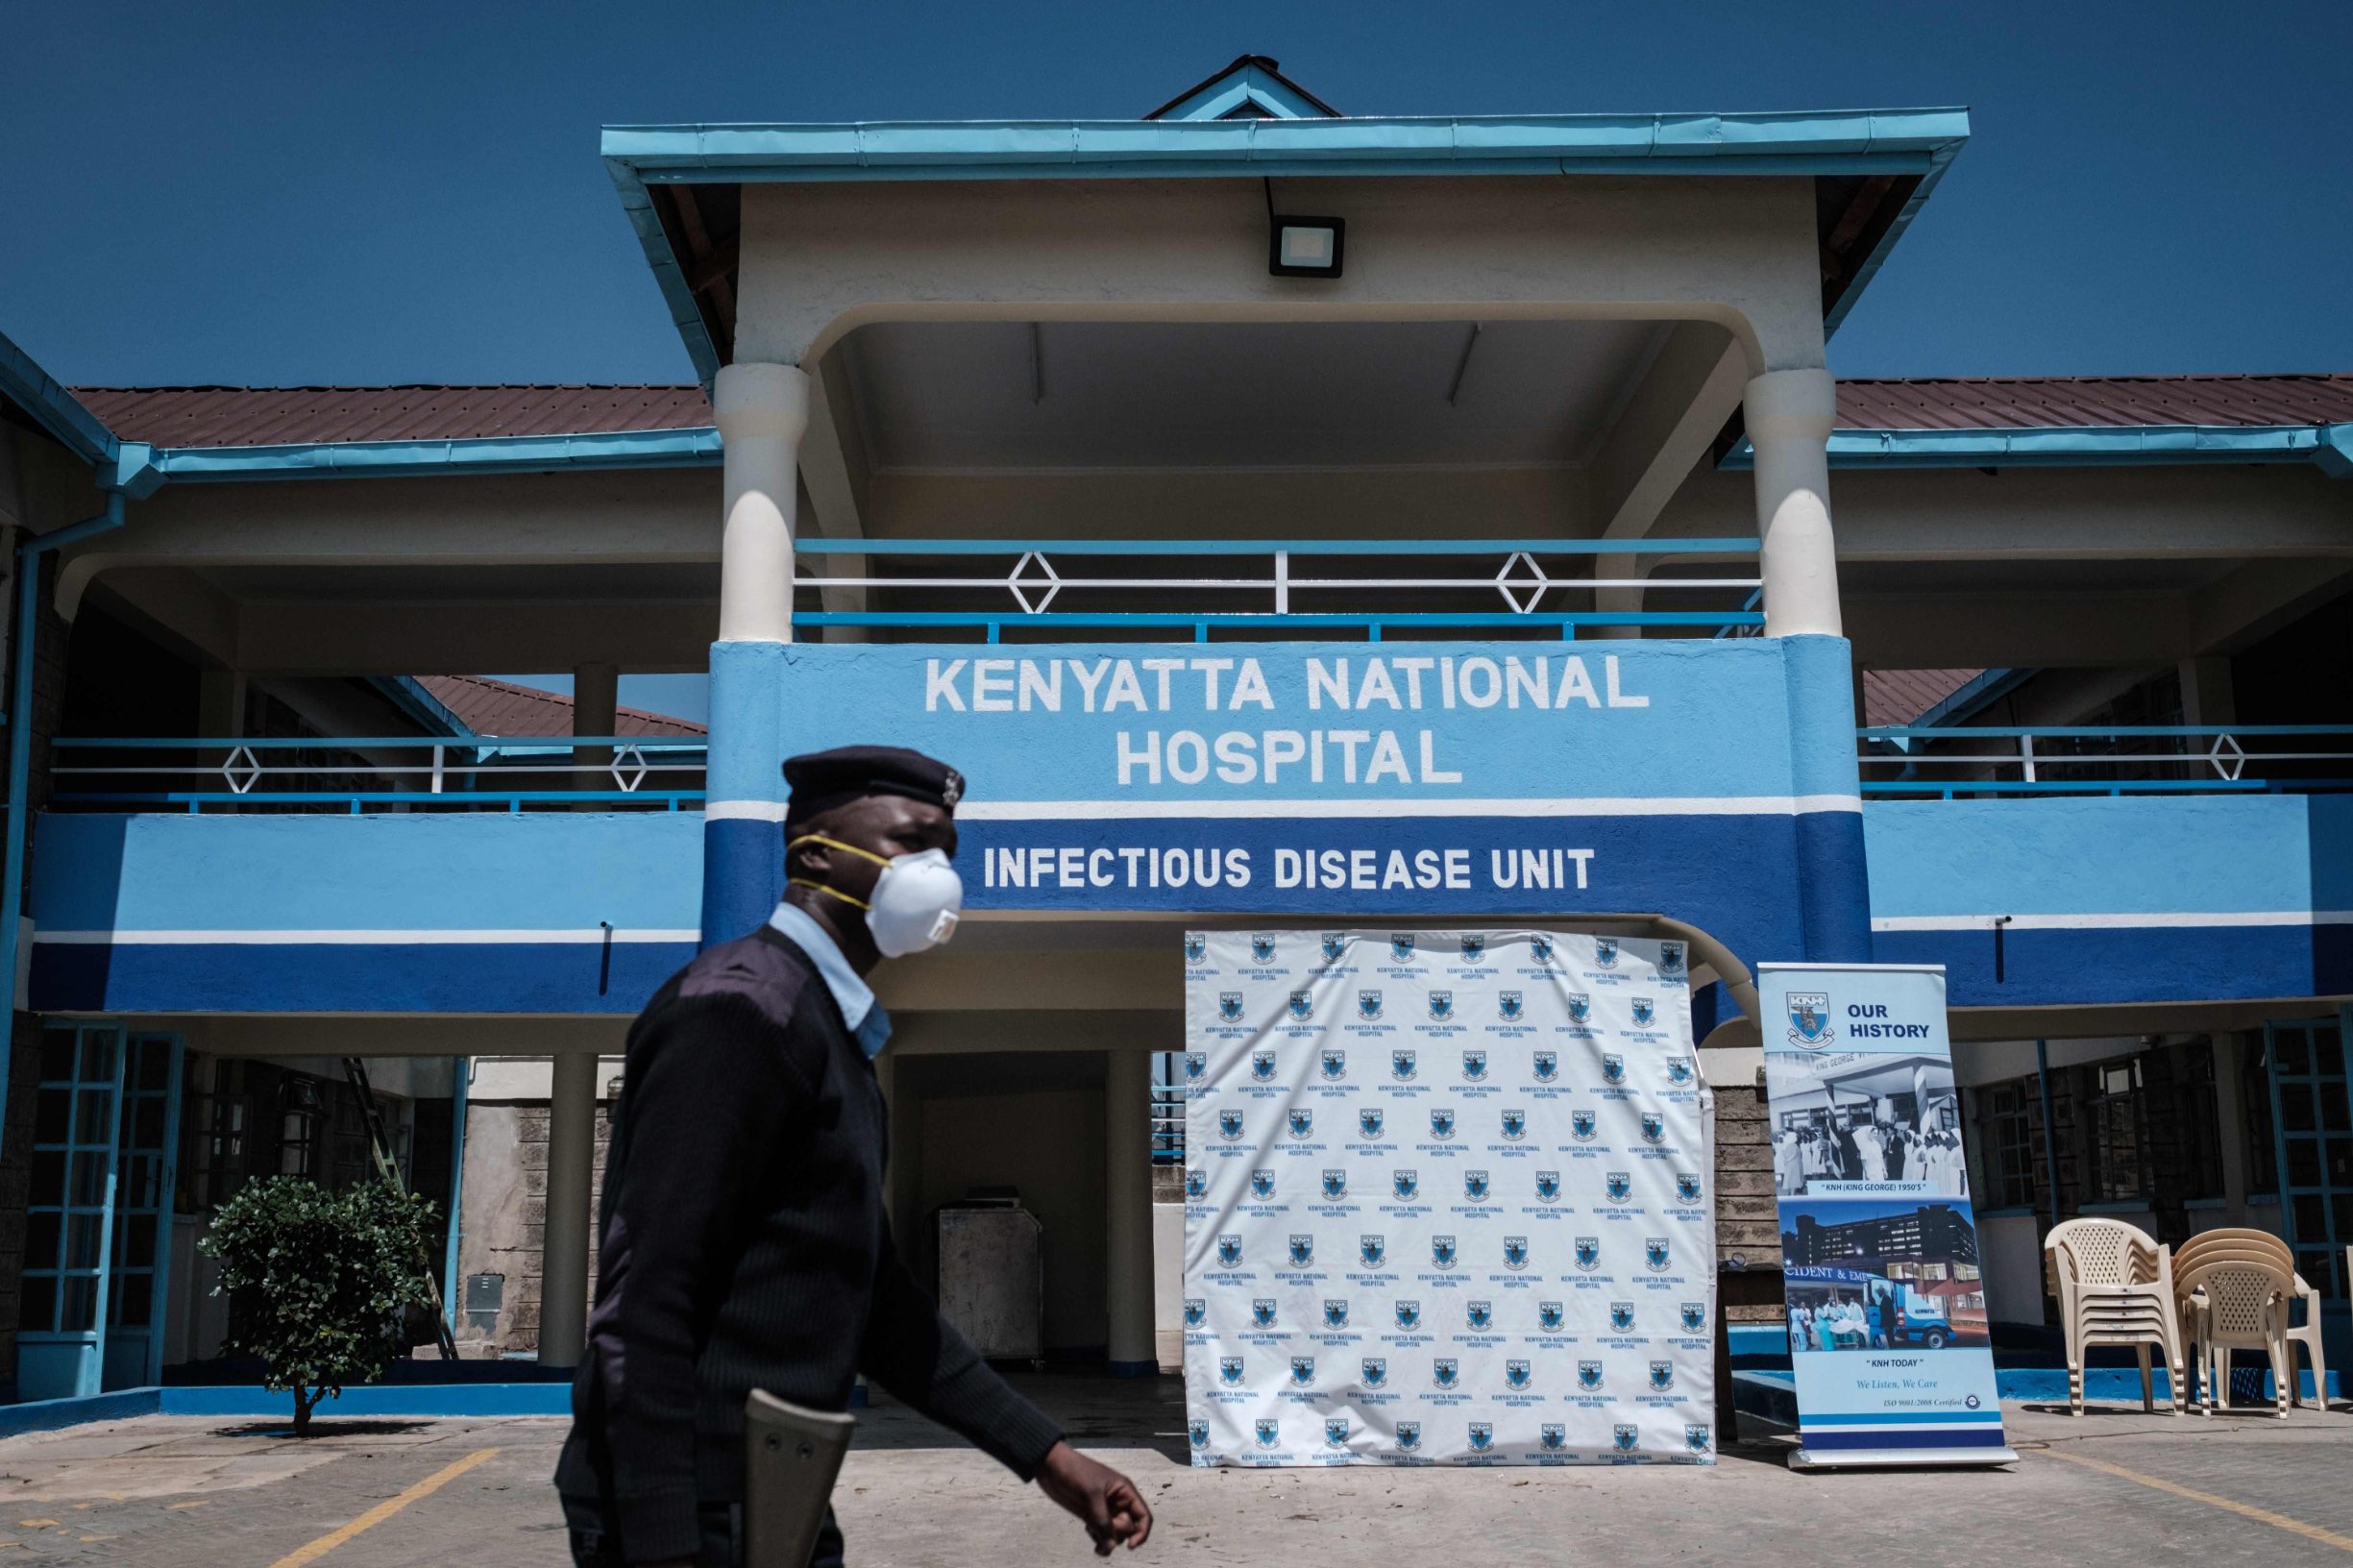 A picture taken on March 15, 2020 shows the entrance of the Infectious Disease Unit of Kenyatta National Hospital in Nairobi, Kenya, during the COVID-19 outbreak, caused by the novel coronavirus. - Kenya announced on March 13, 2020, the first confirmed case of coronavirus in East Africa, as the region so far unscathed by the global pandemic scaled up emergency measures to contain its spread.
A 27-year-old Kenyan woman tested positive for the virus on March 12 in Nairobi, a week after returning from the United States via London. (Photo by Yasuyoshi CHIBA / AFP)